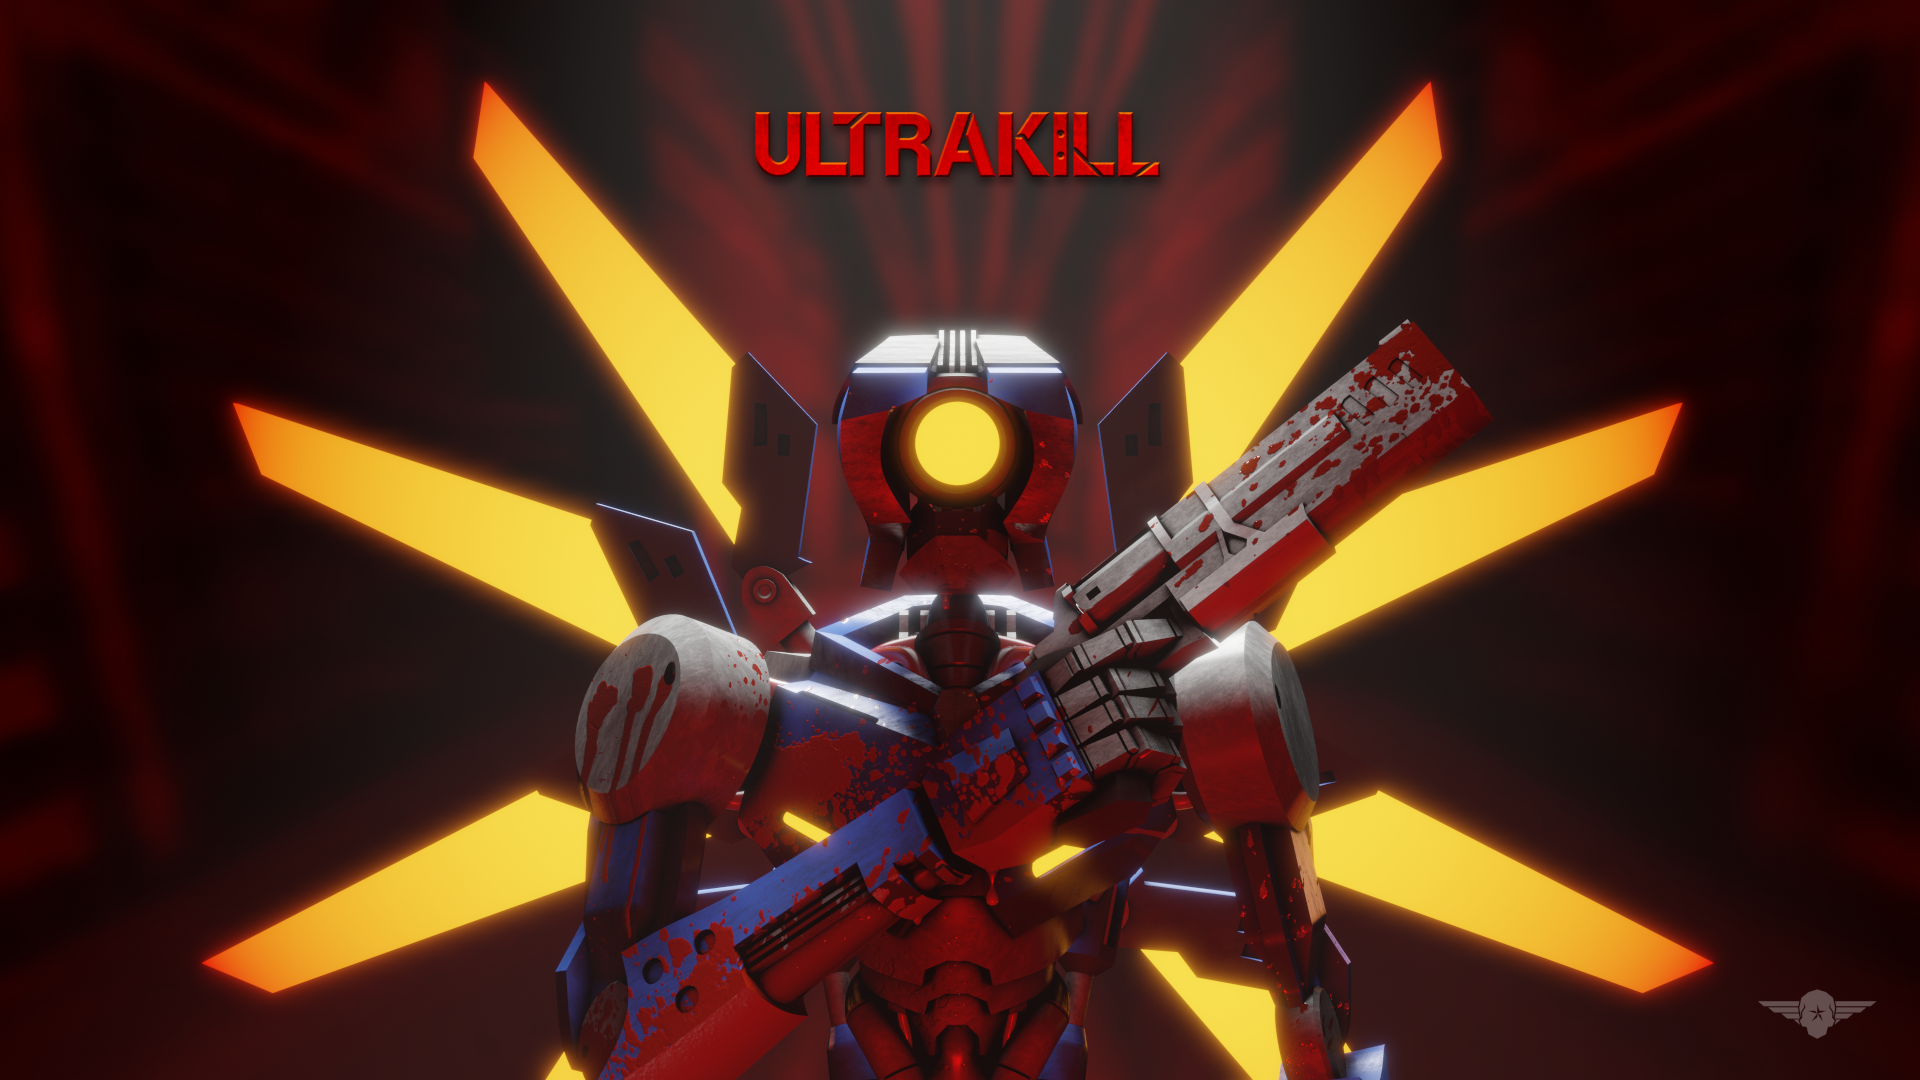 Search Character Tag # ? V1 (ultrakill) 154 Series Tag # ? Ultrakill 237 Information Uploader: Llibert_Gamedev Date: 2 Months Ago Size: 1.6MB (1920x1080) Type: Image Png Source: Link Rating: Safe Image Controls Full Size Fit Width Fit Height Fit